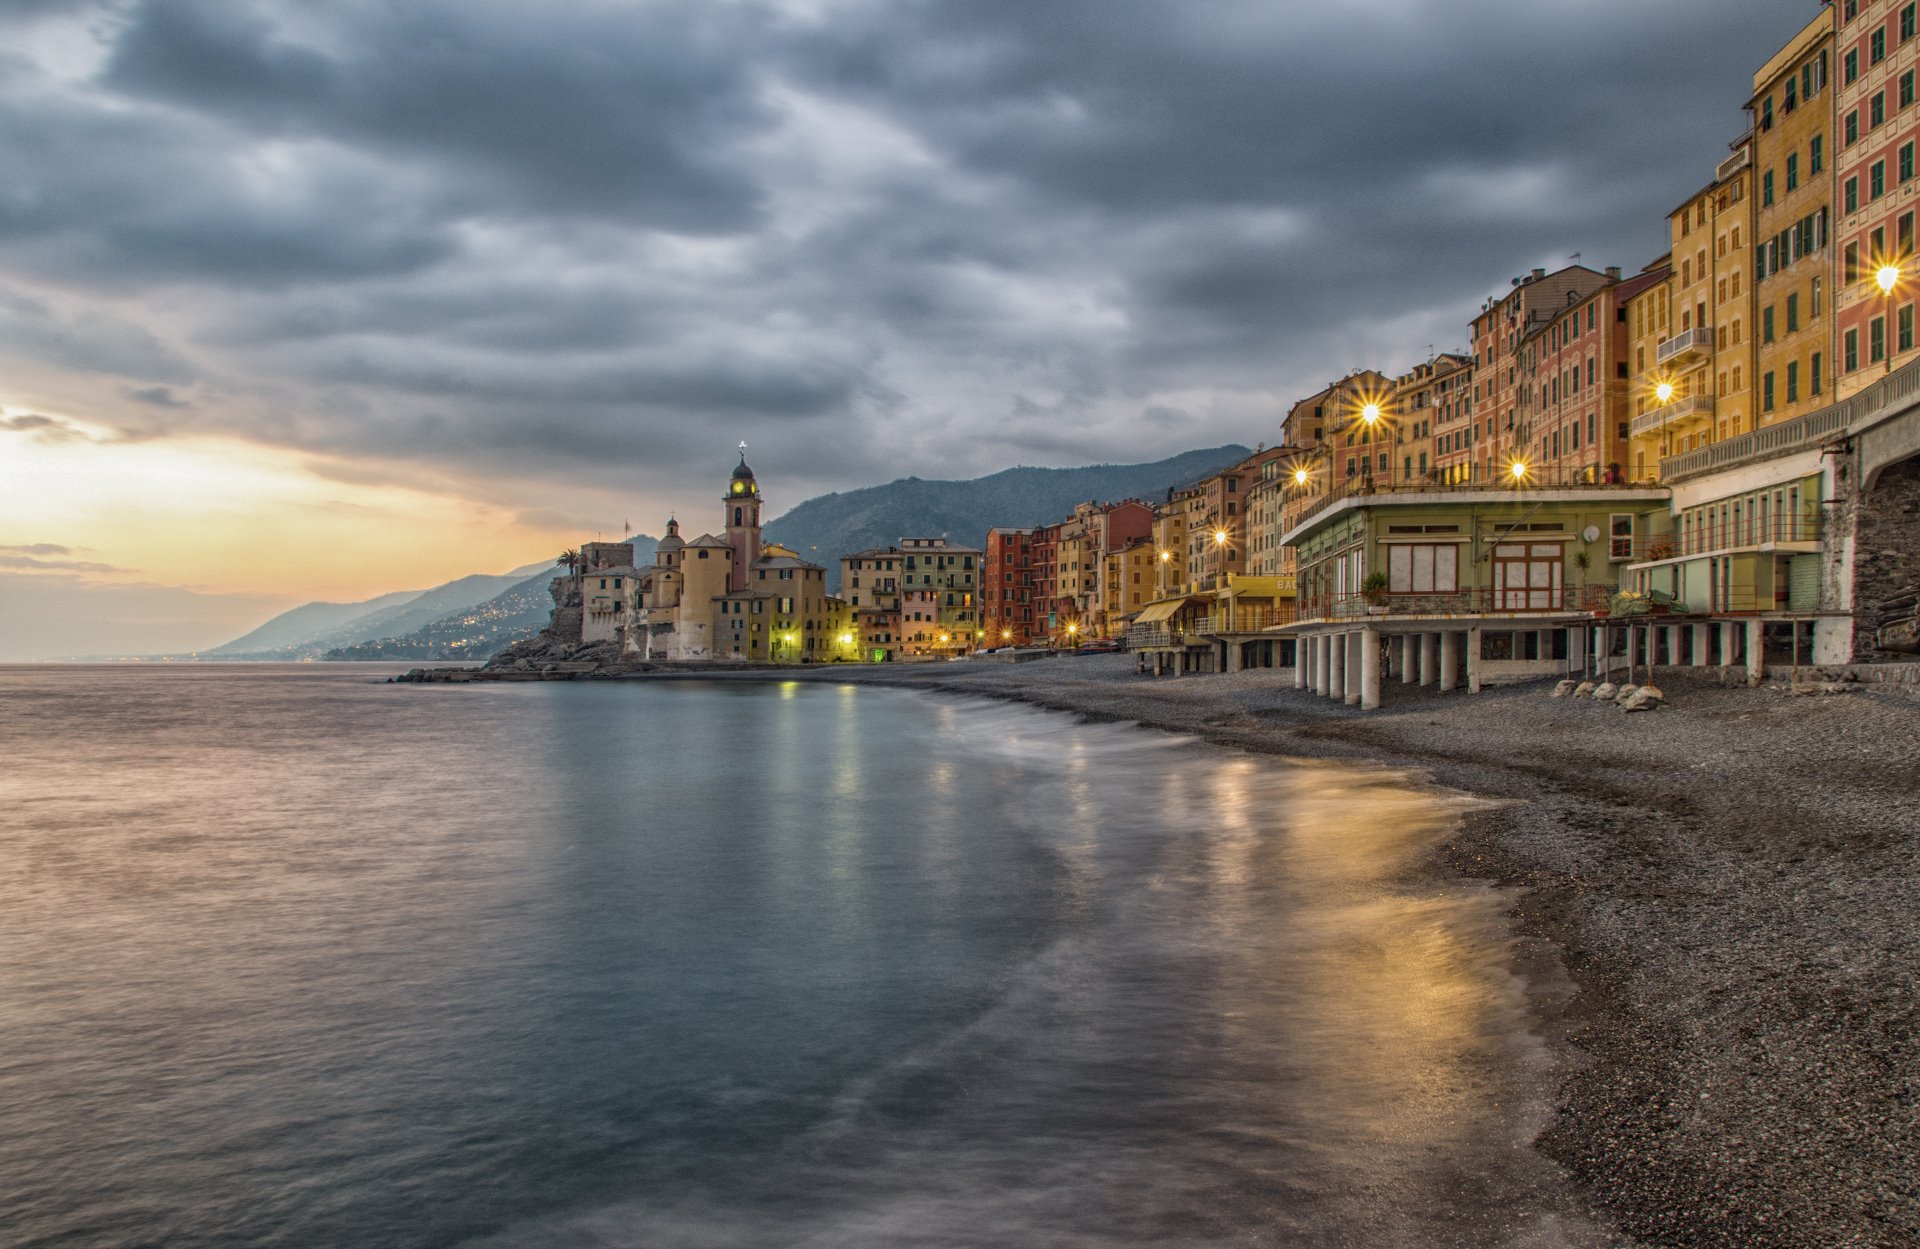 Coming in the evening on "Camogli"...